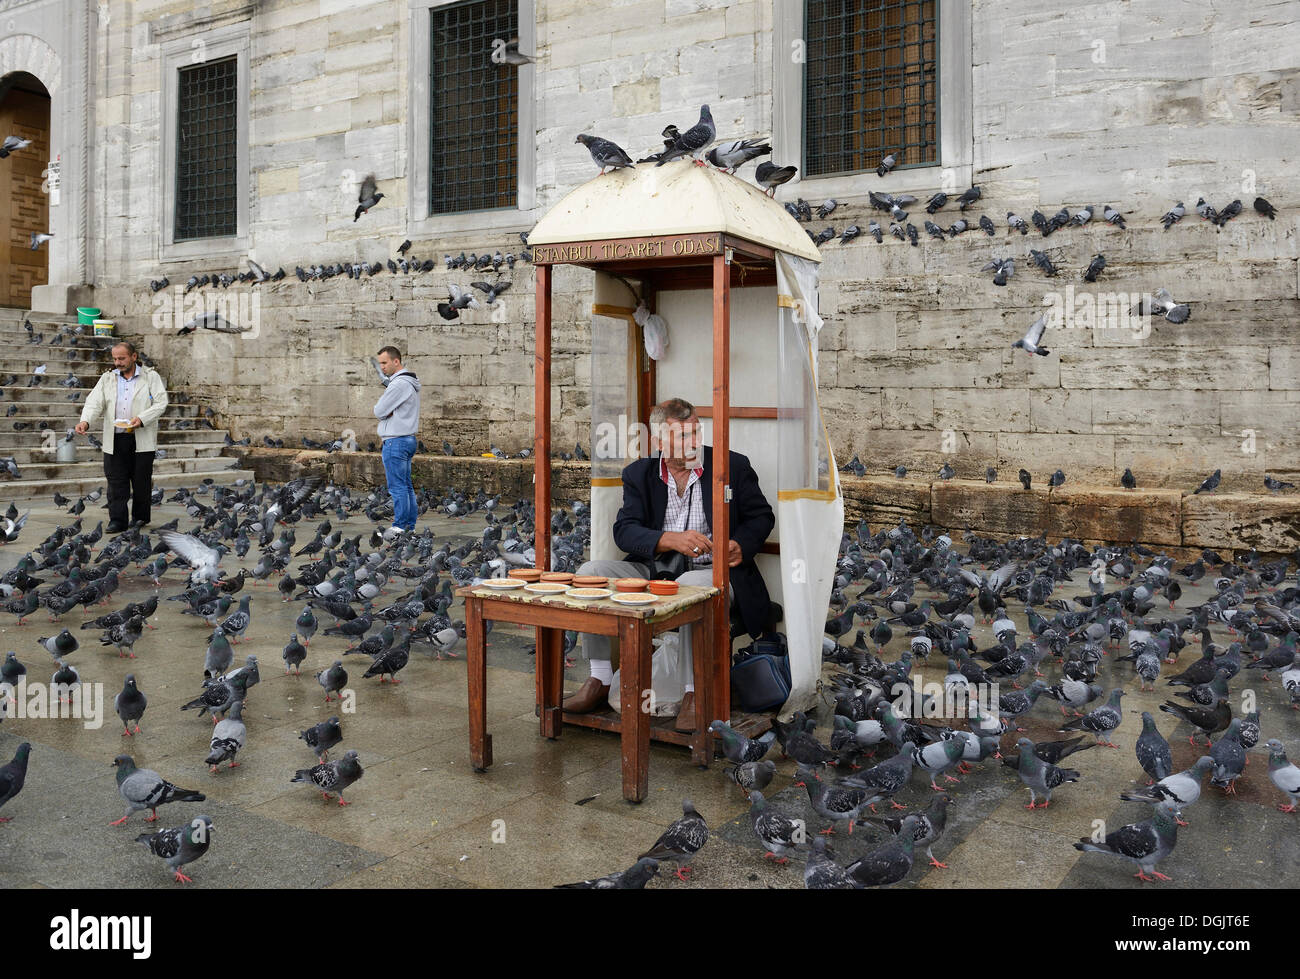 Man selling bird feed, surrounded by pigeons, in front of the Yeni Cami or New Mosque, Eminönü, Istanbul, European side Stock Photo